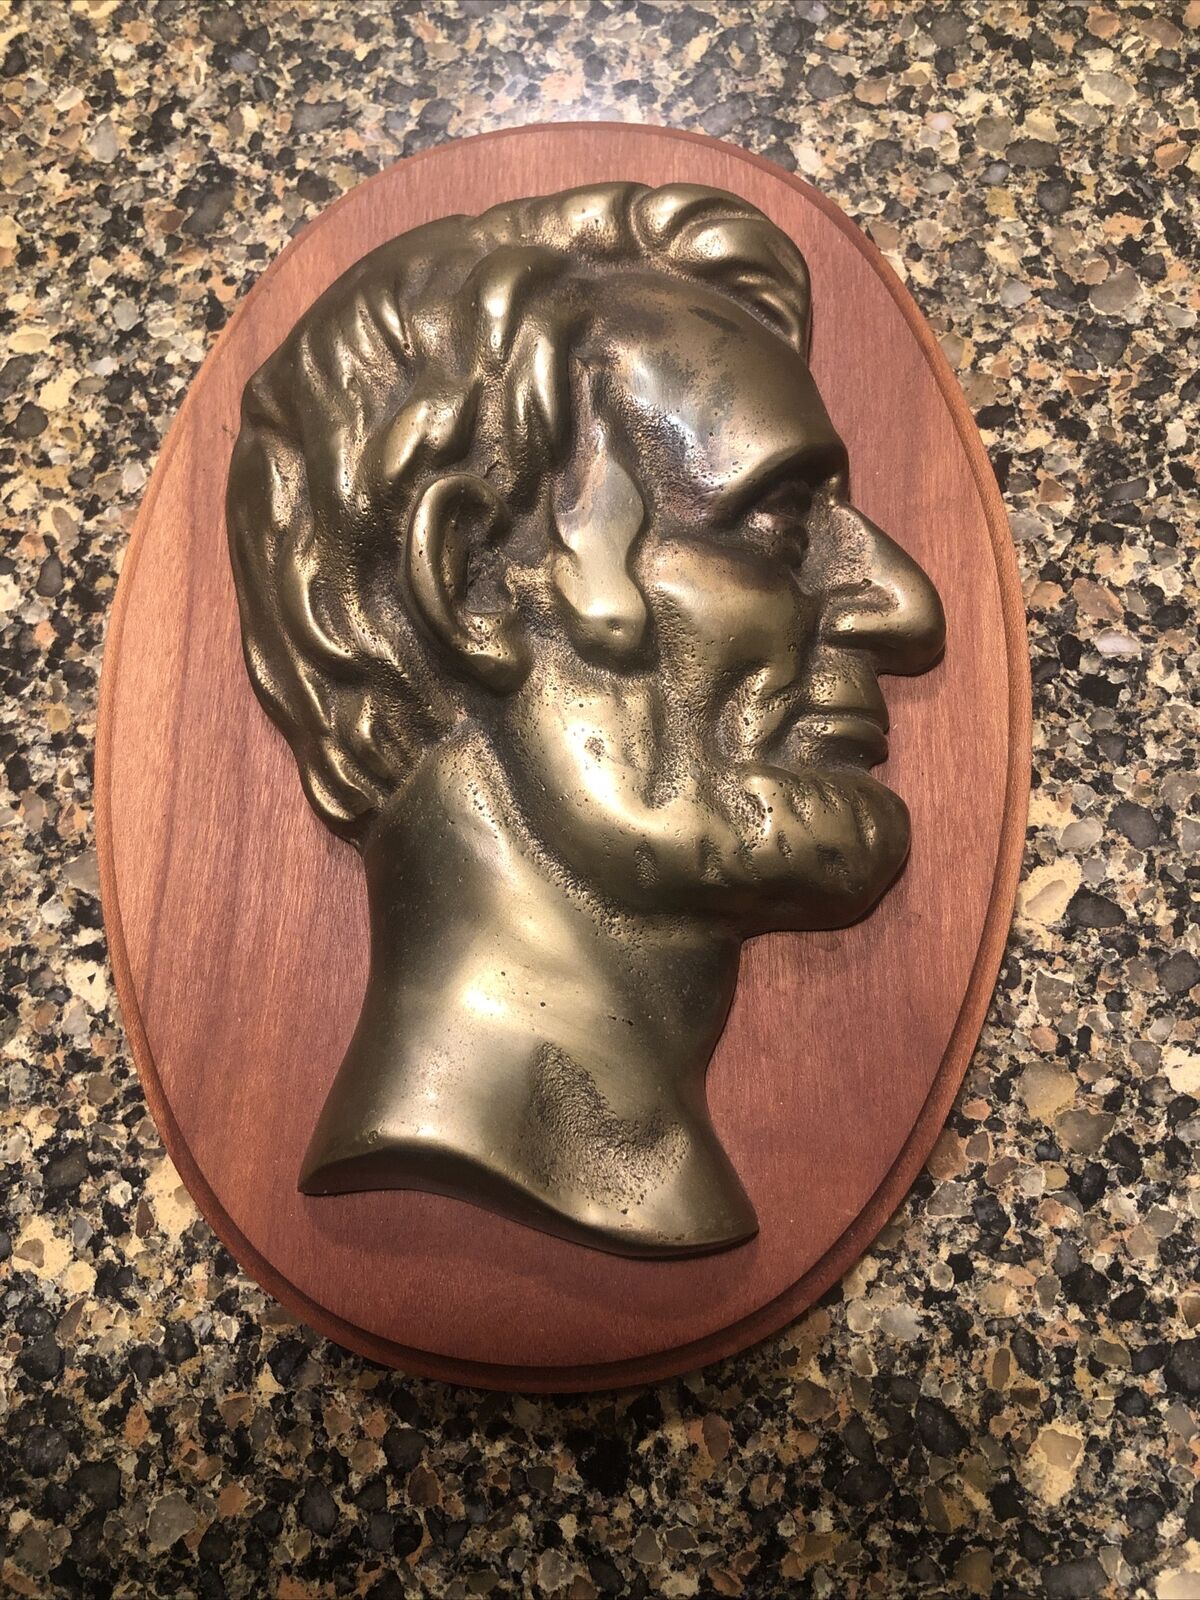 VINTAGE ABE LINCOLN BUST BRONZED FINISH SOLID CAST BRASS WALL PLAQUE